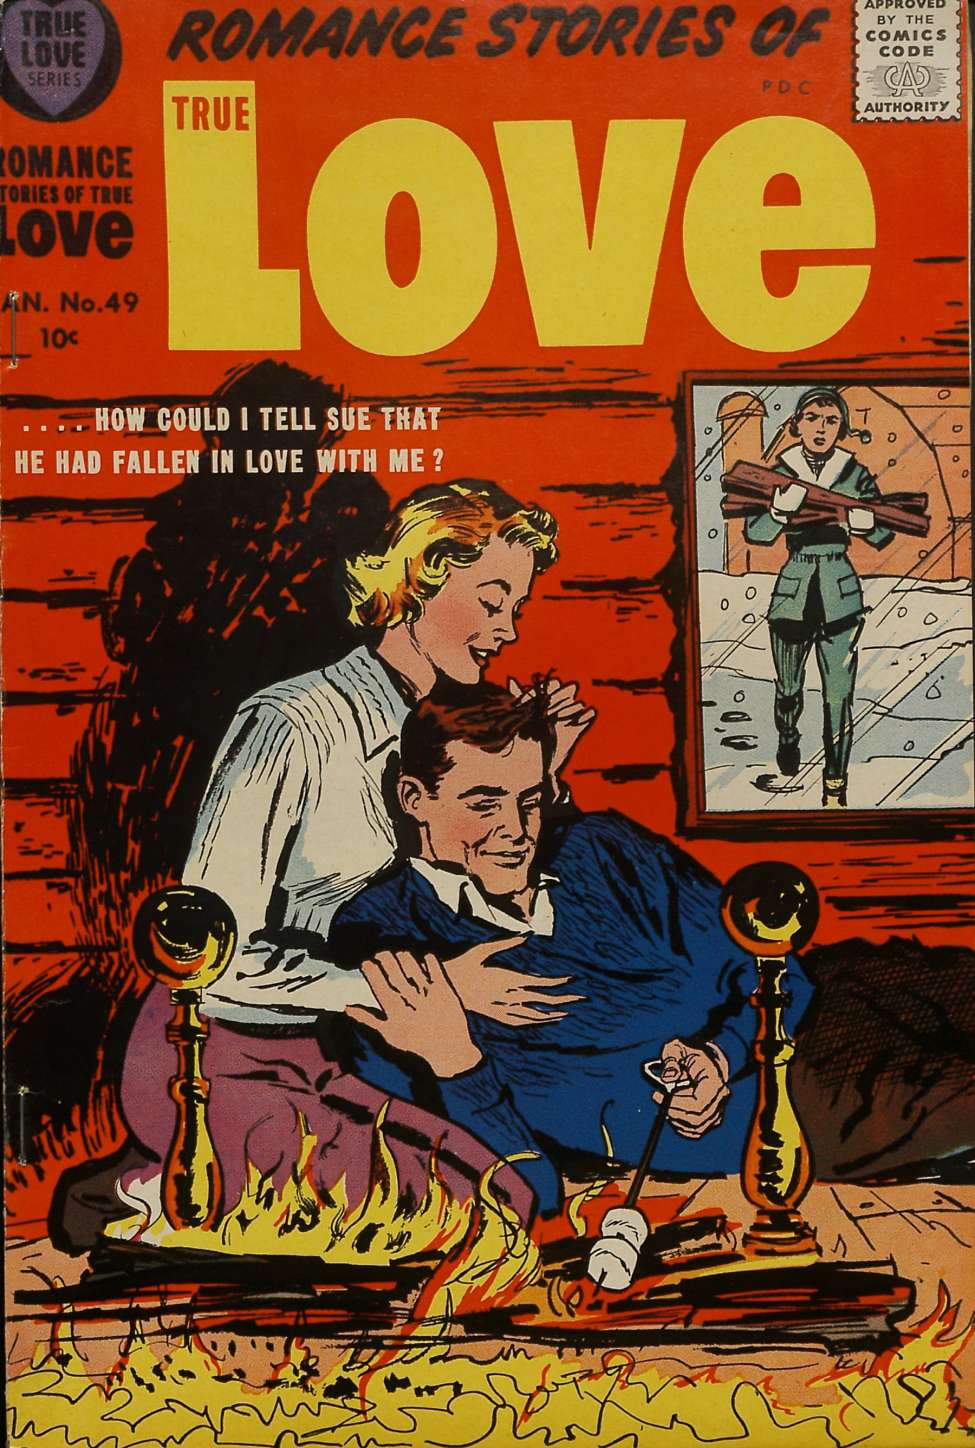 Comic Book Cover For Romance Stories of True Love 49